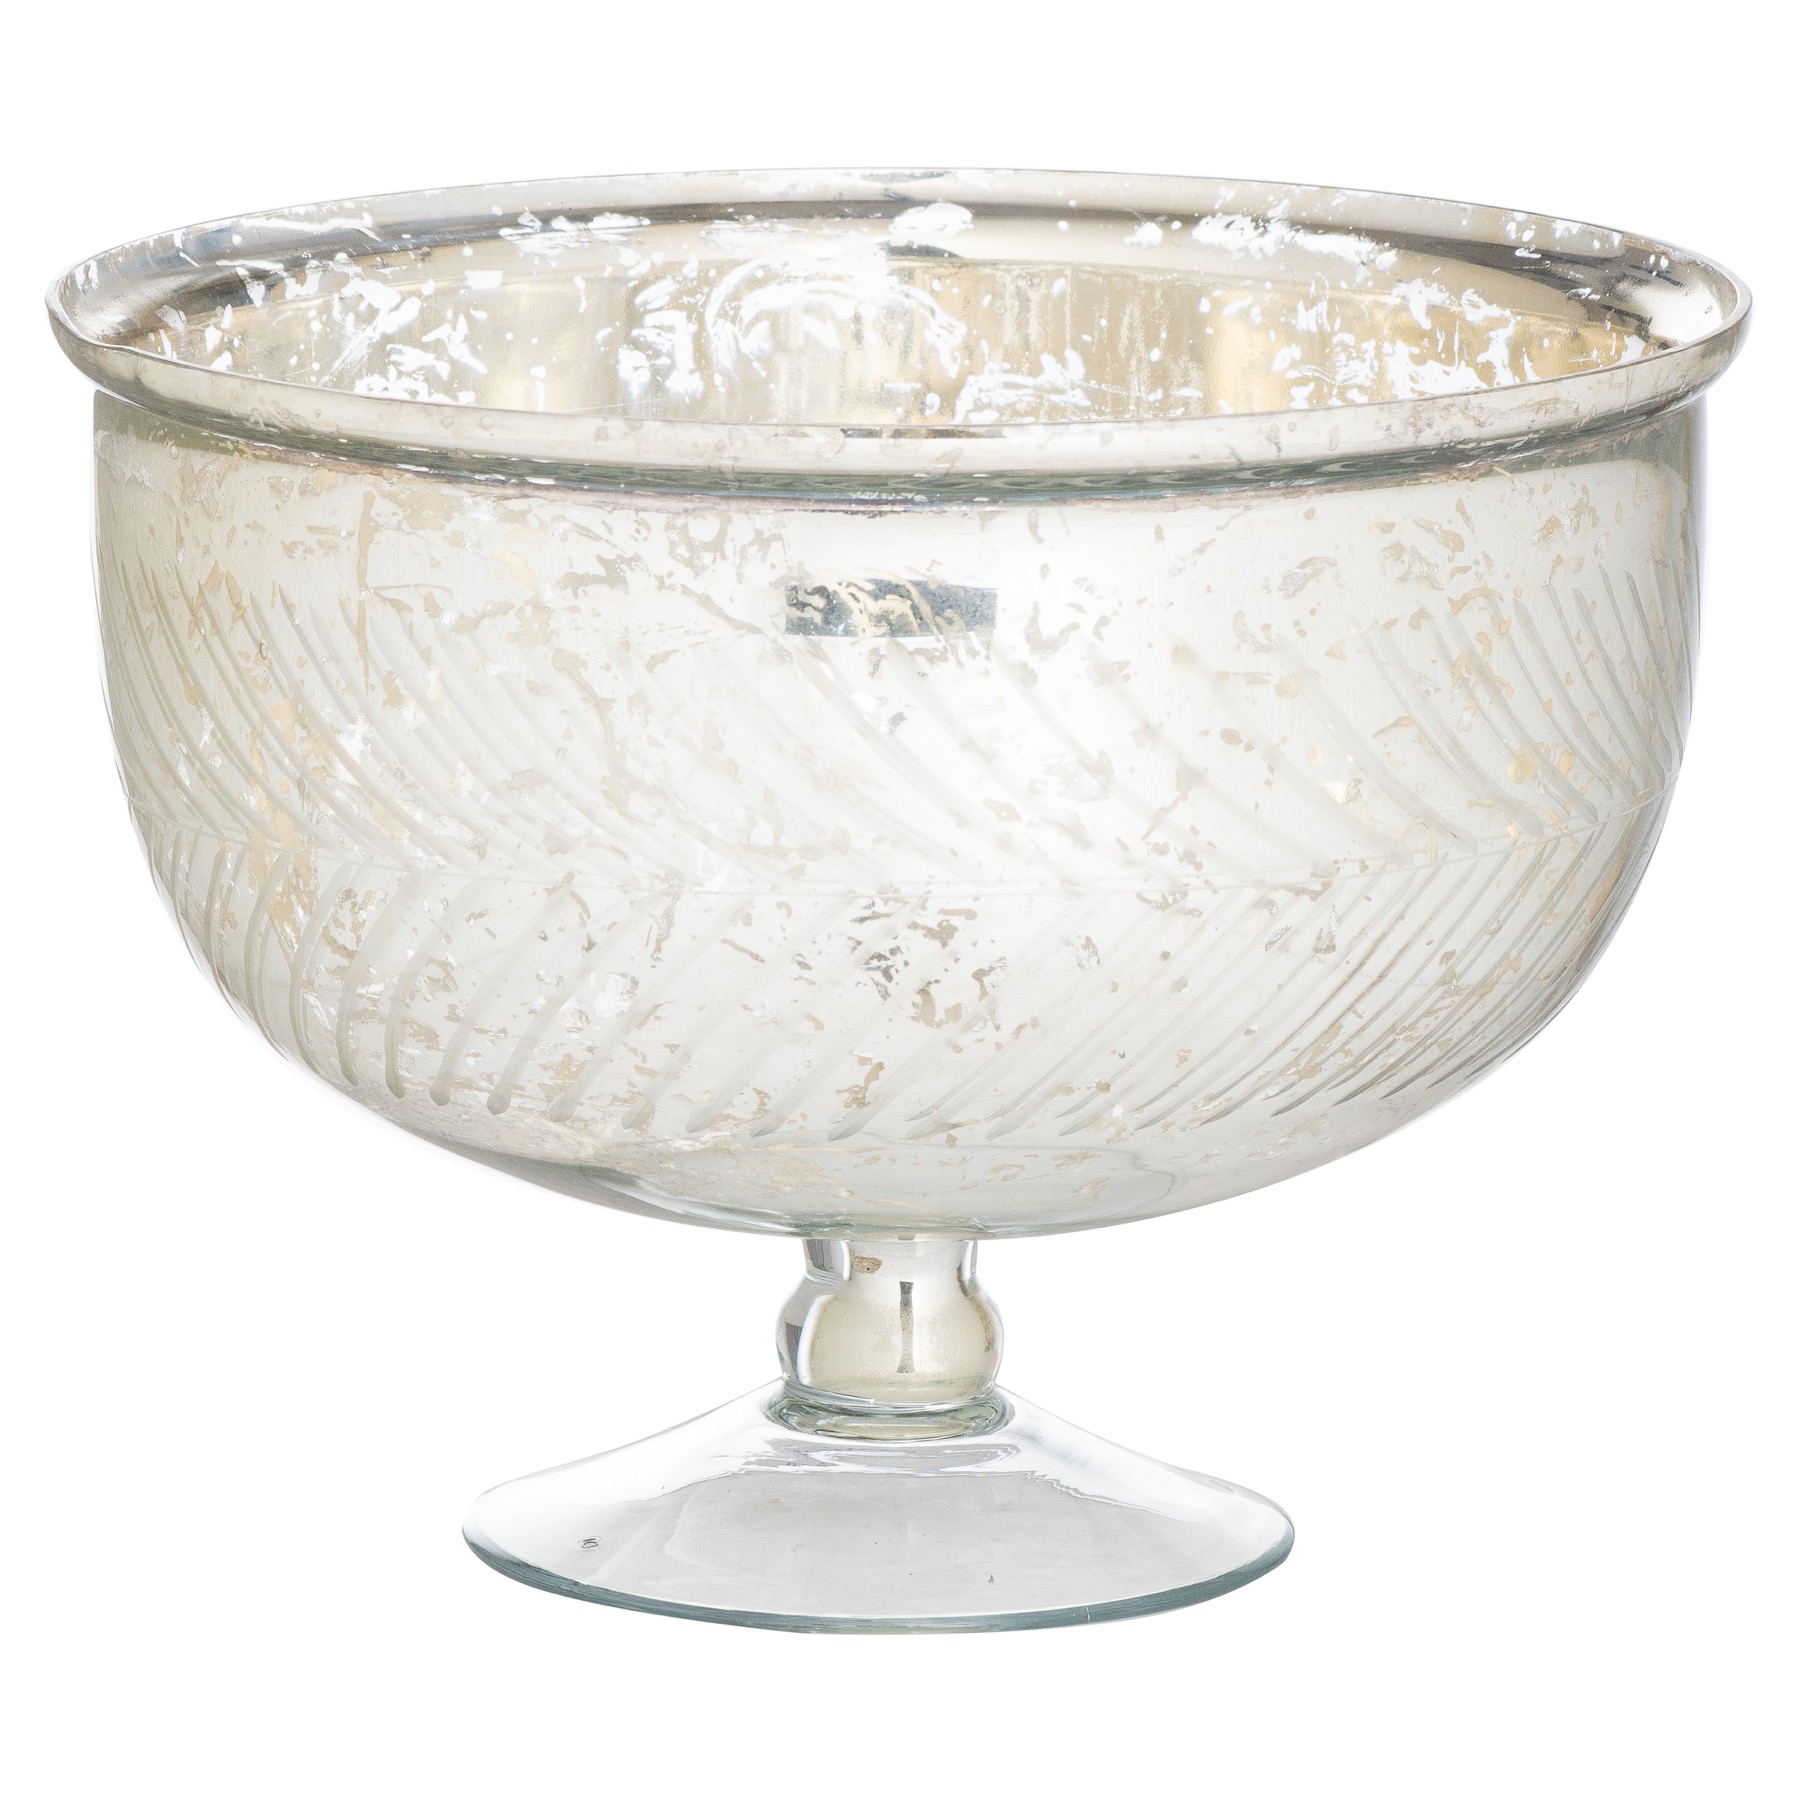 The Lustre Silver Glass Decorative Extra Large Footed Bowl - Image 1